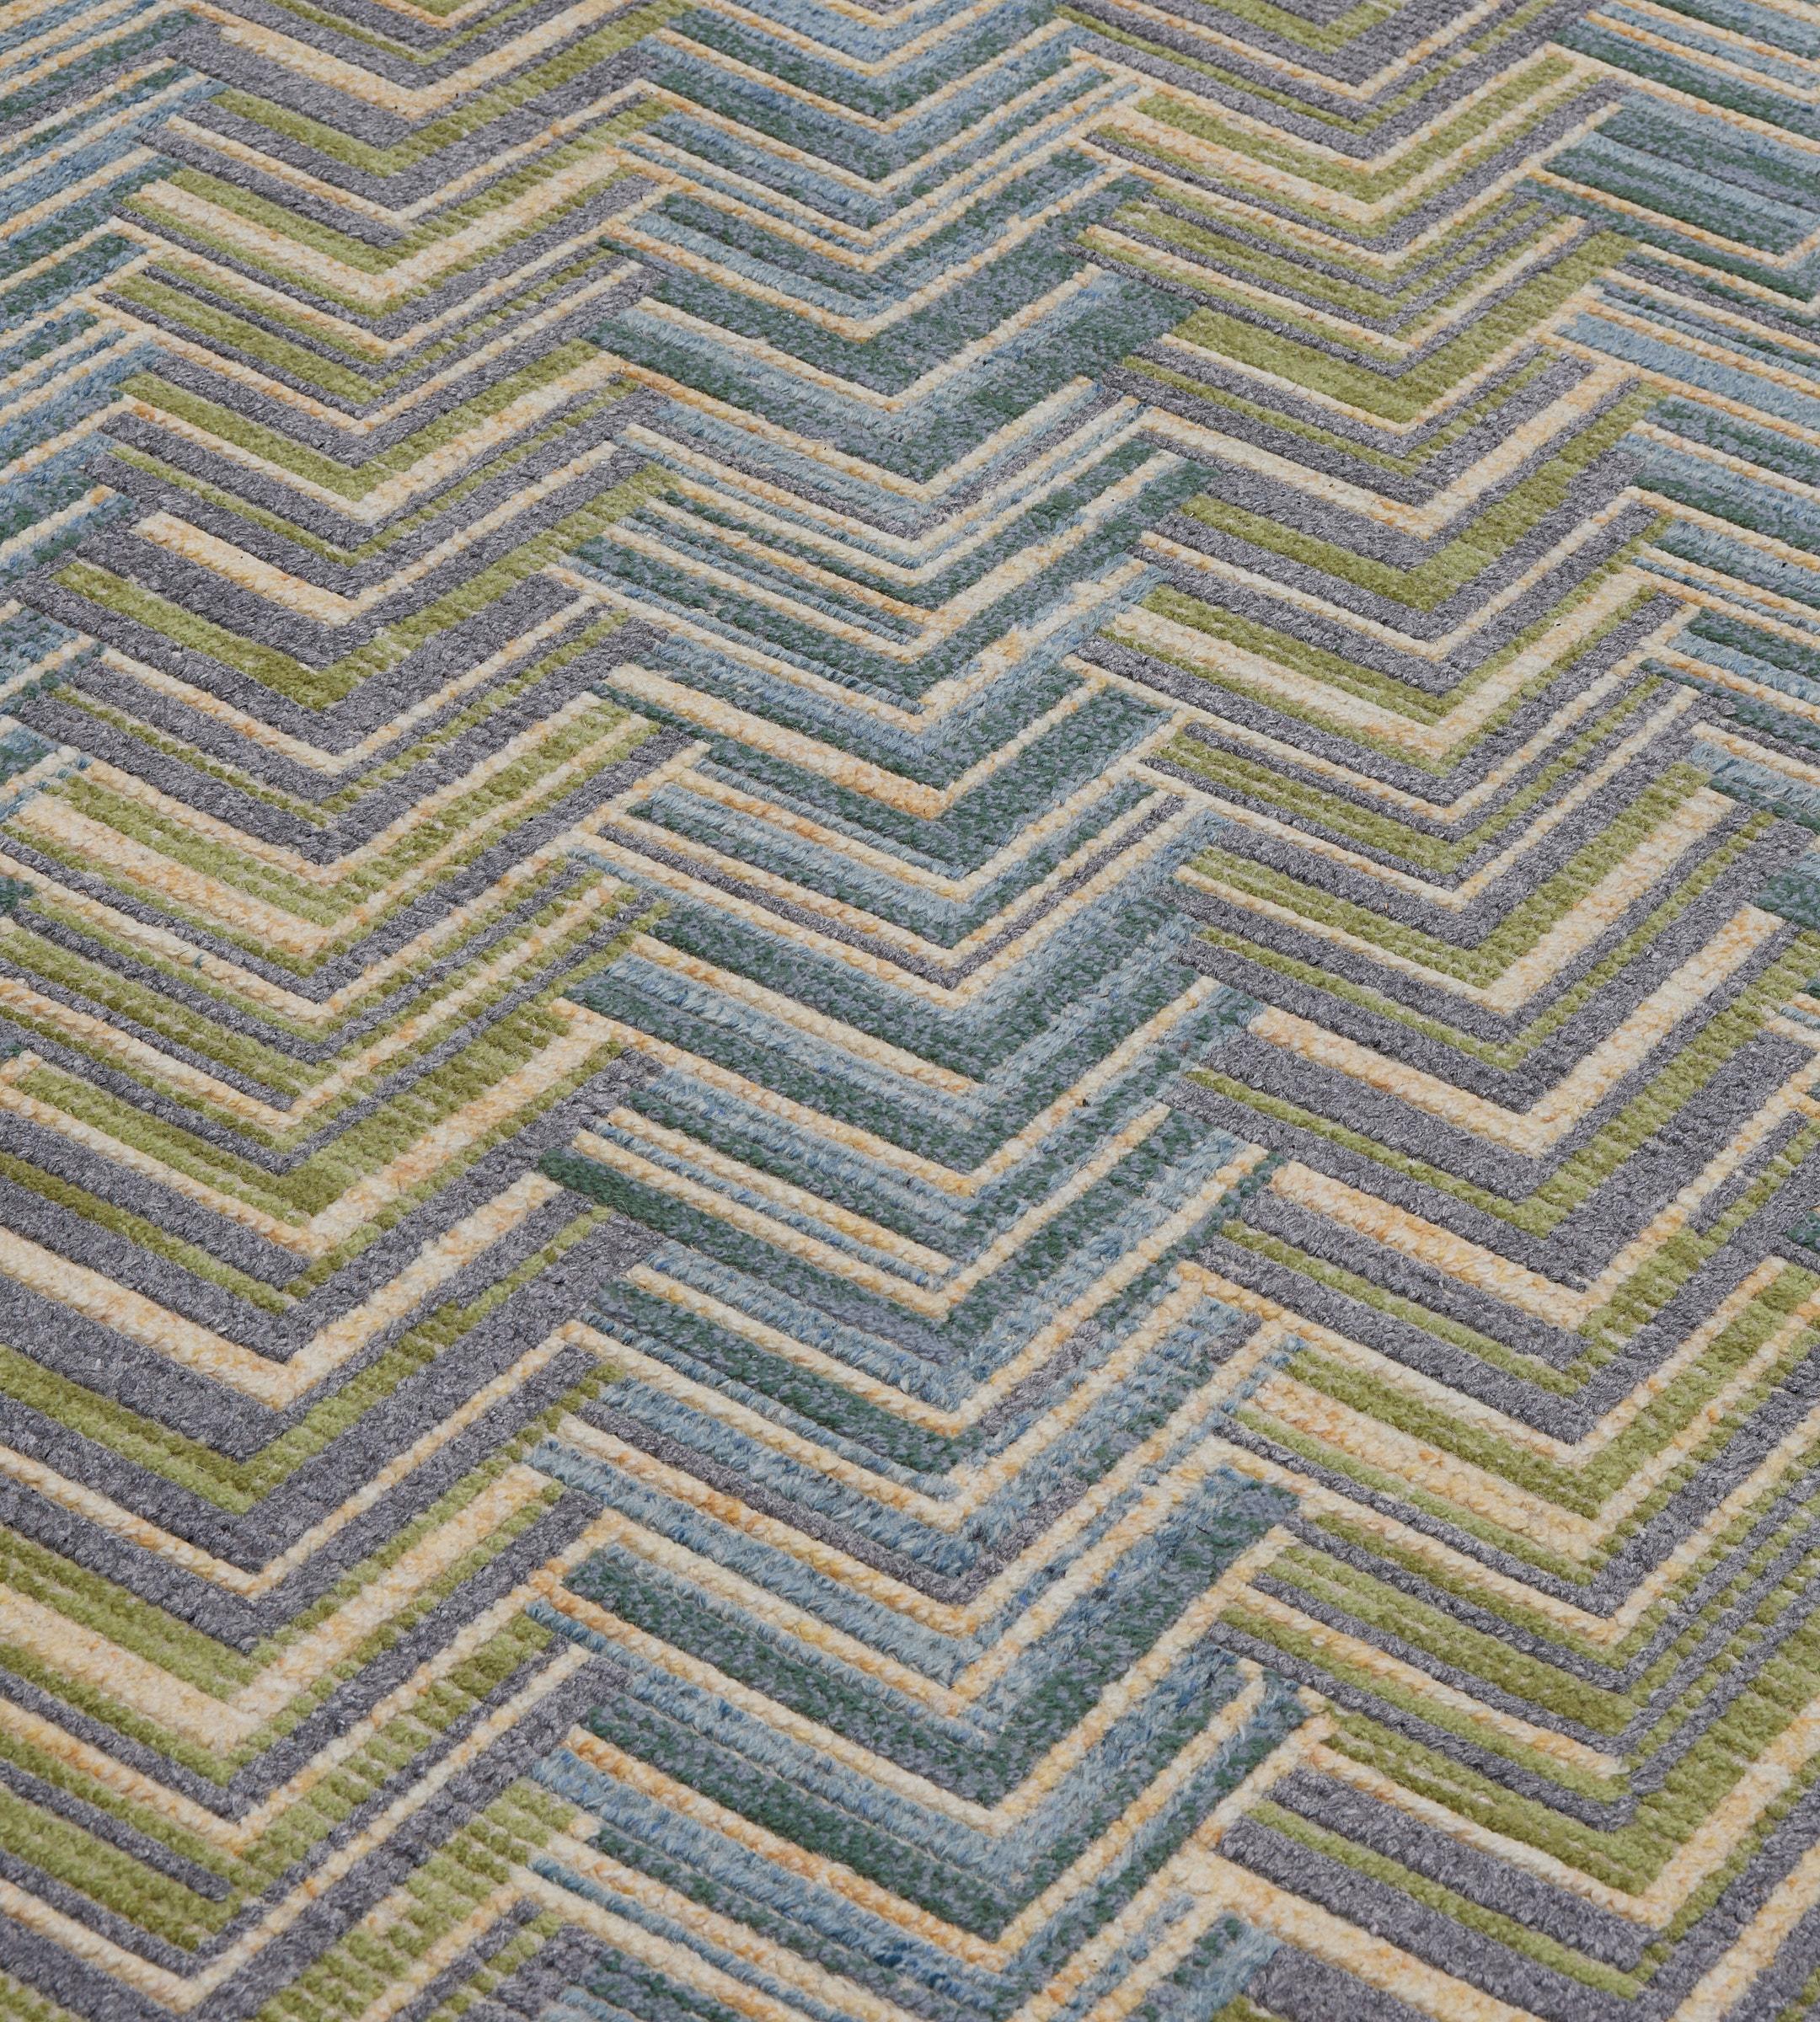 The Mansour Modern Swedish collection is primarily inspired by vintage Swedish flat-weave rugs whose geometric designs are relevant as ever in the 21st century. The collection utilizes a number of flat-weave techniques, yielding various distinctive